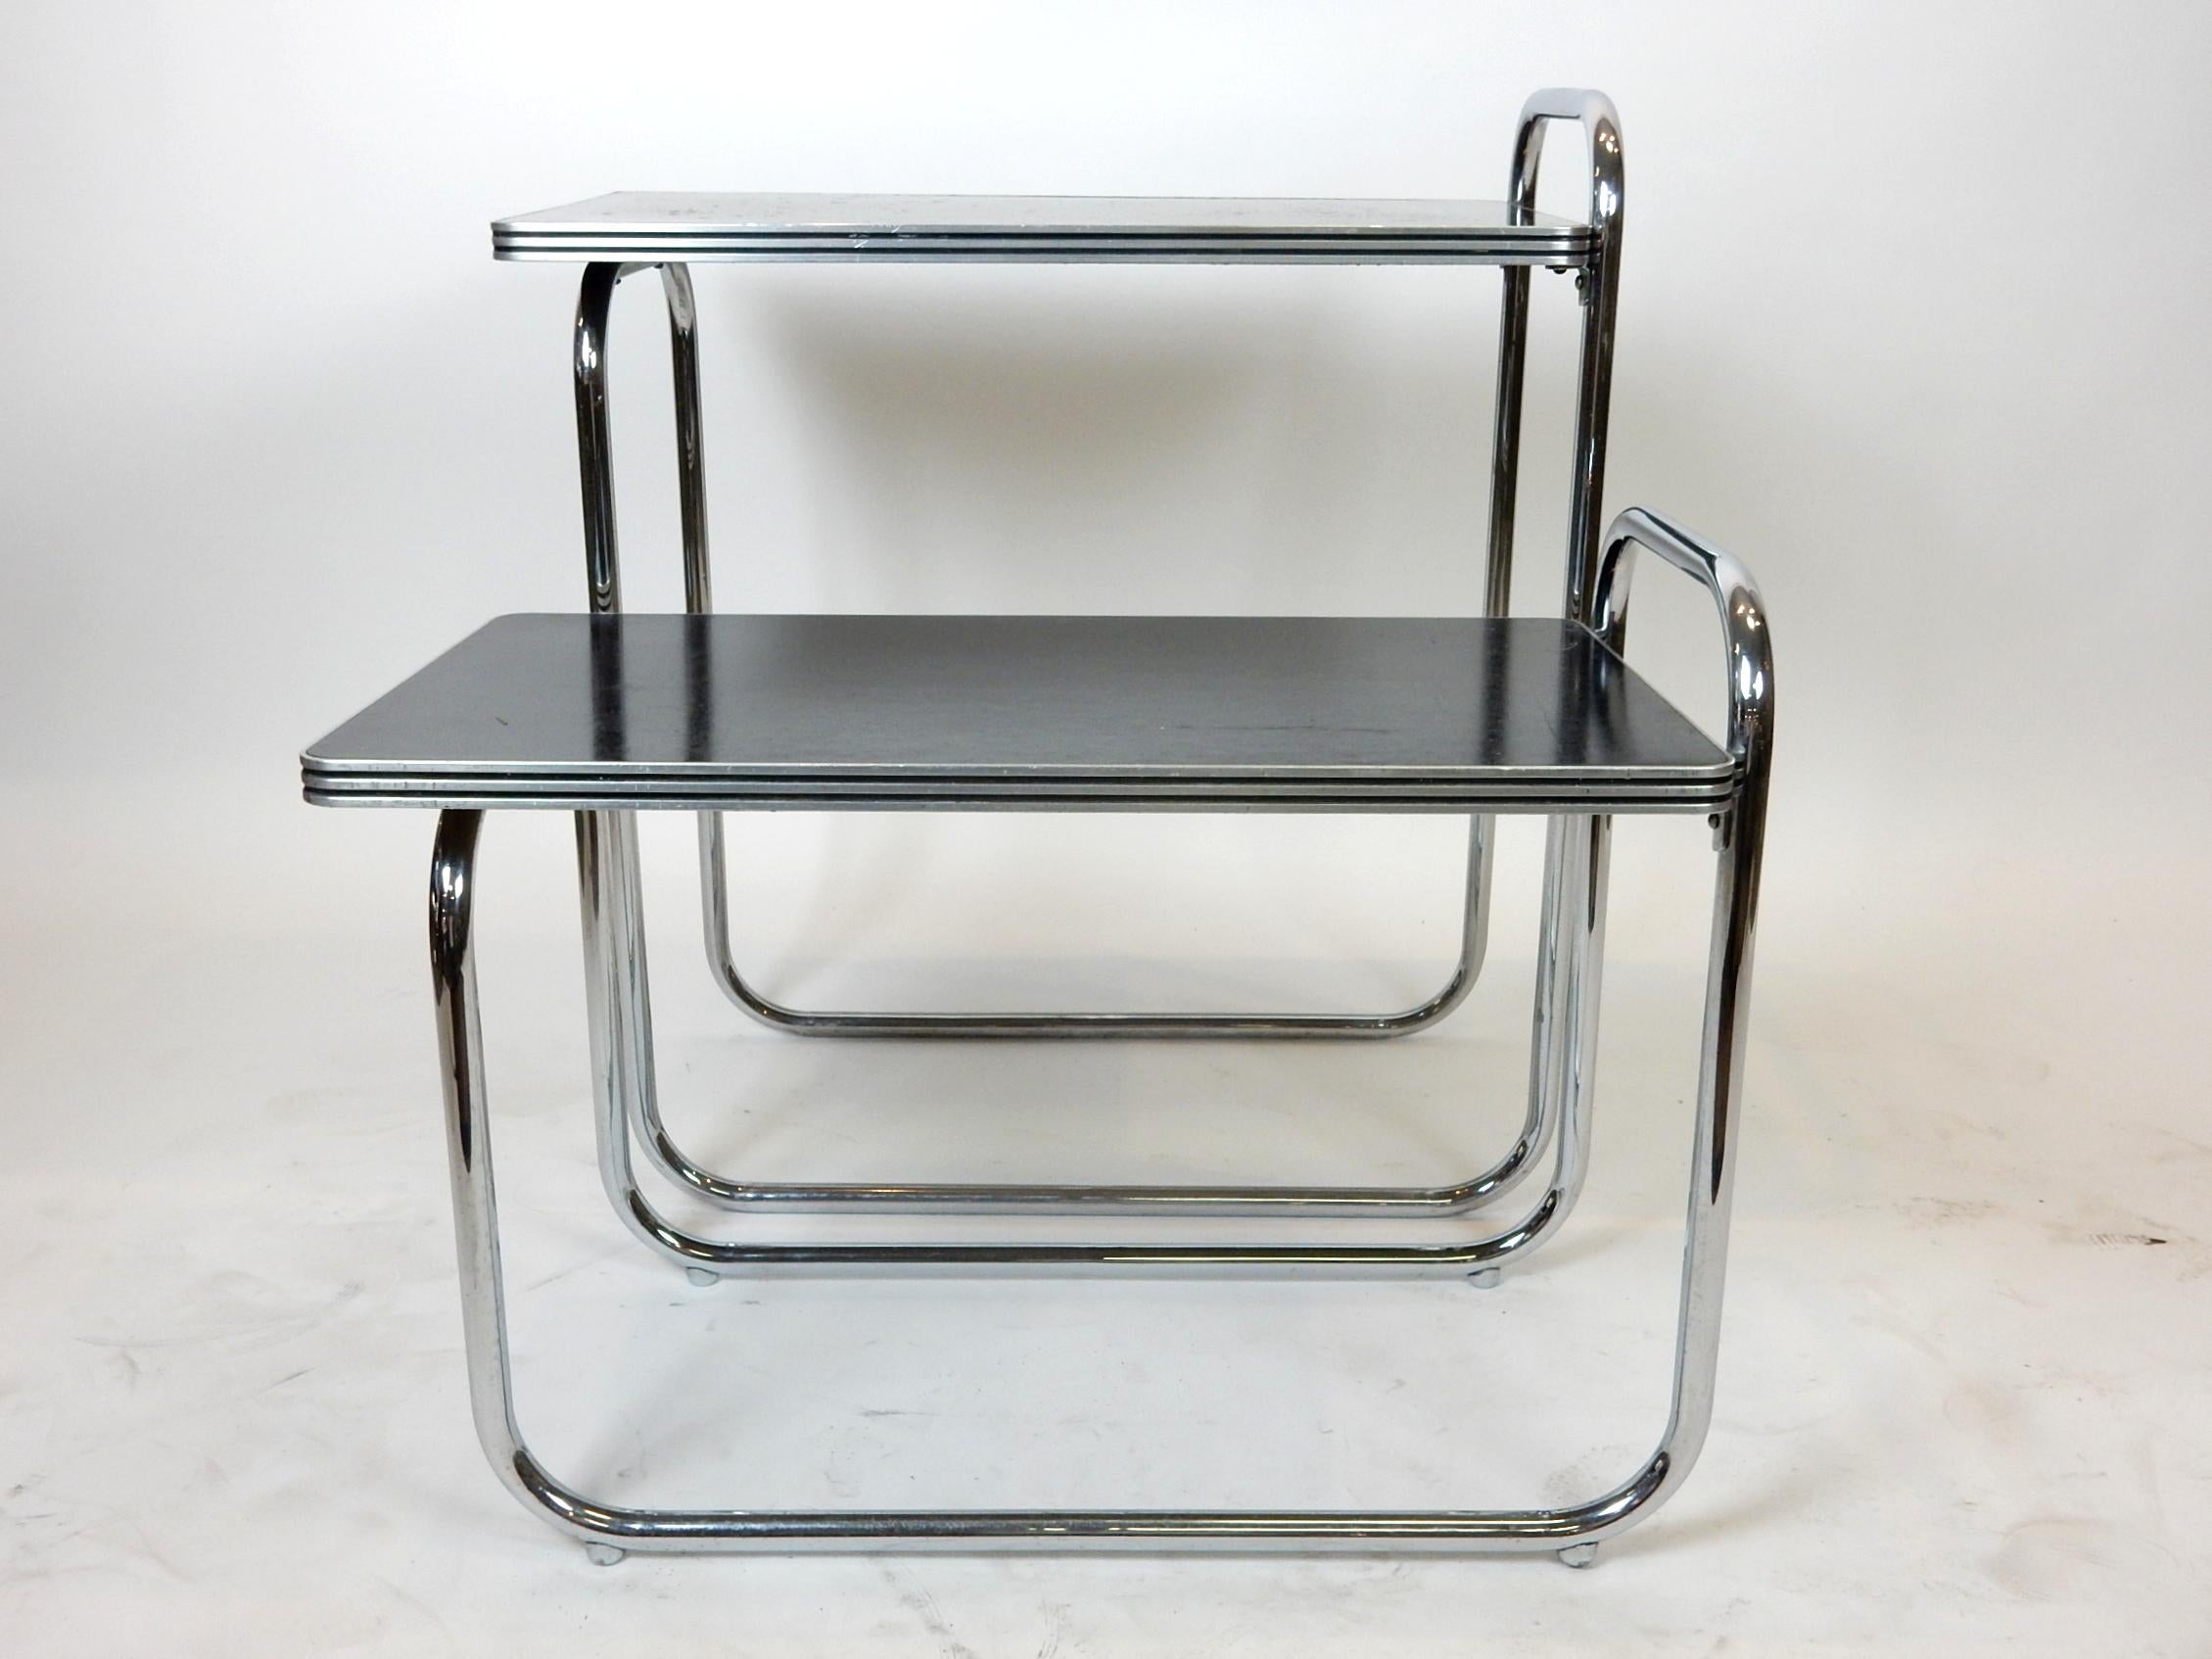 Mid-20th Century Art Deco Era Chrome Nesting Tables Gilbert Rohde design for Troy Sunshade Co. For Sale